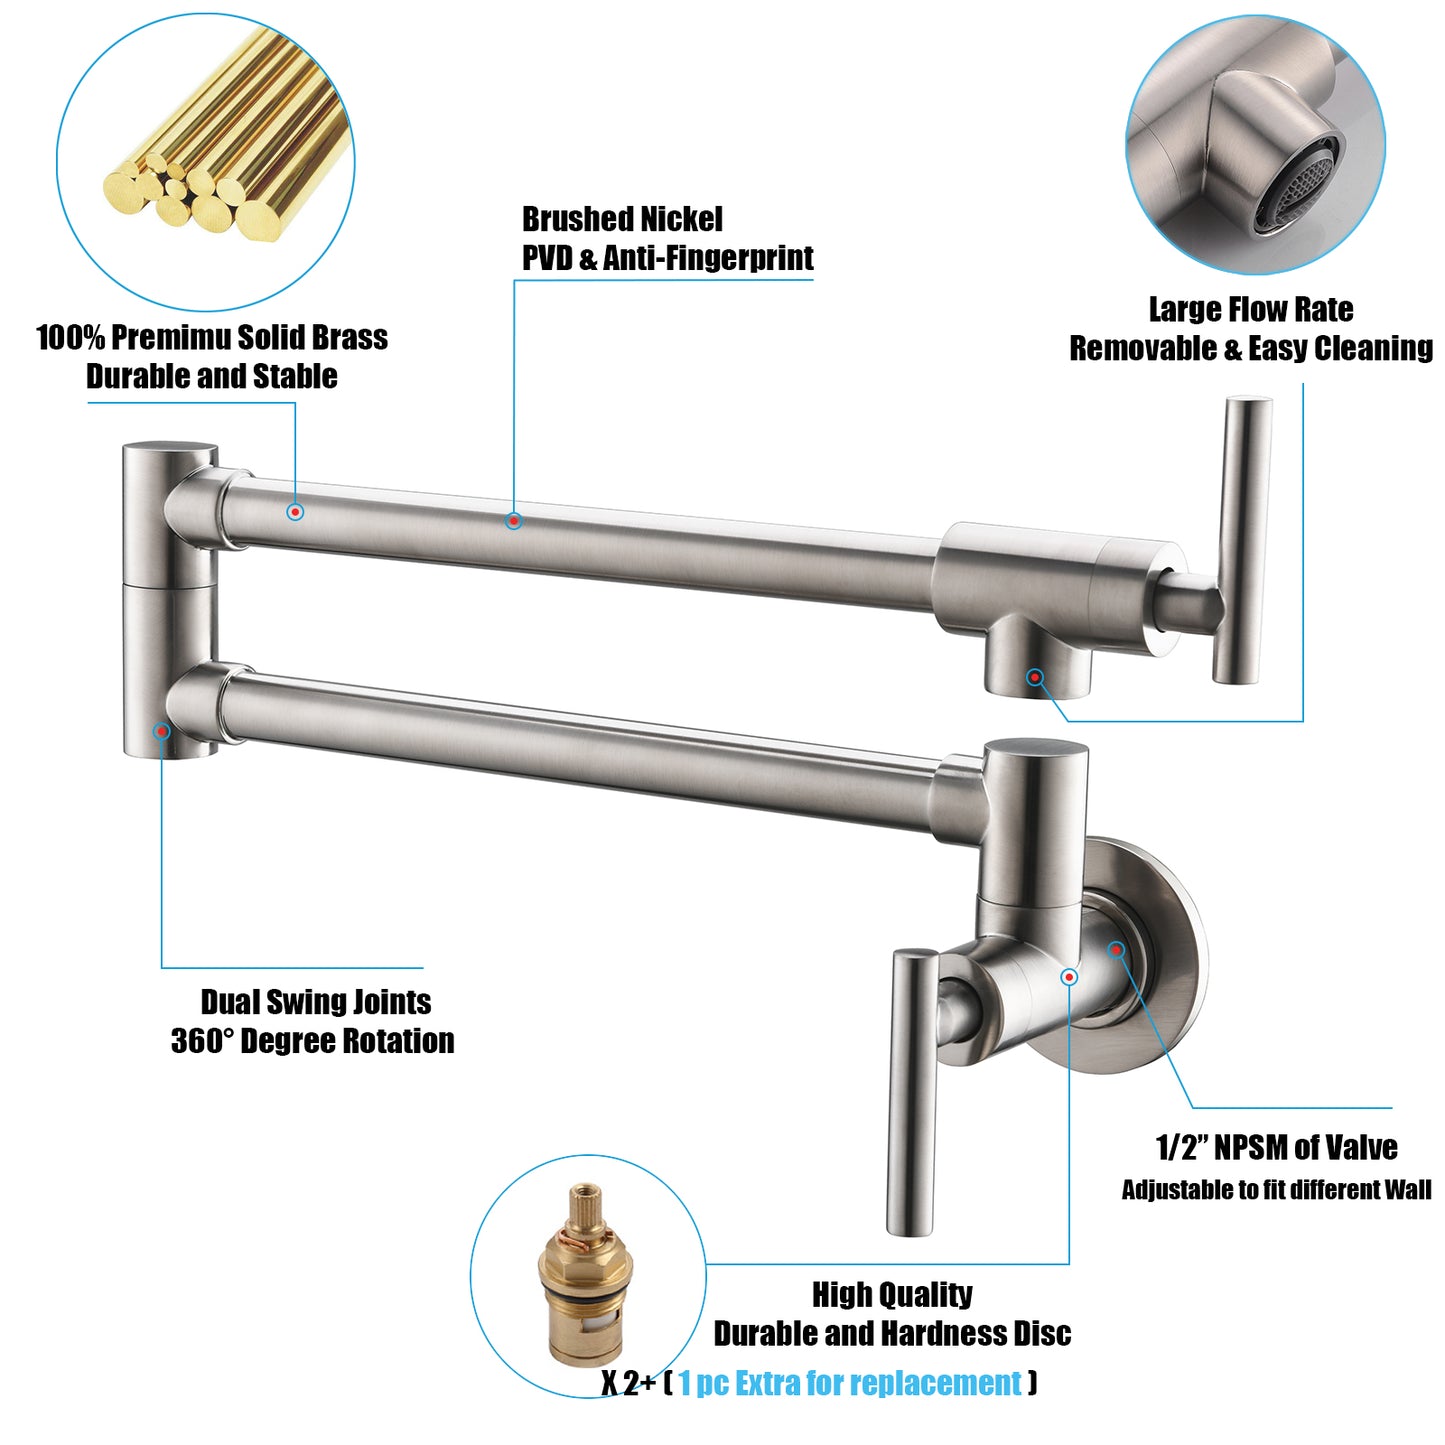 Havin Pot Filler,Pot Filler Faucet Wall Mount,Brass Material,with Double Joint Swing Arms (Style A Brushed Nickel A203, Brushed Nickel)